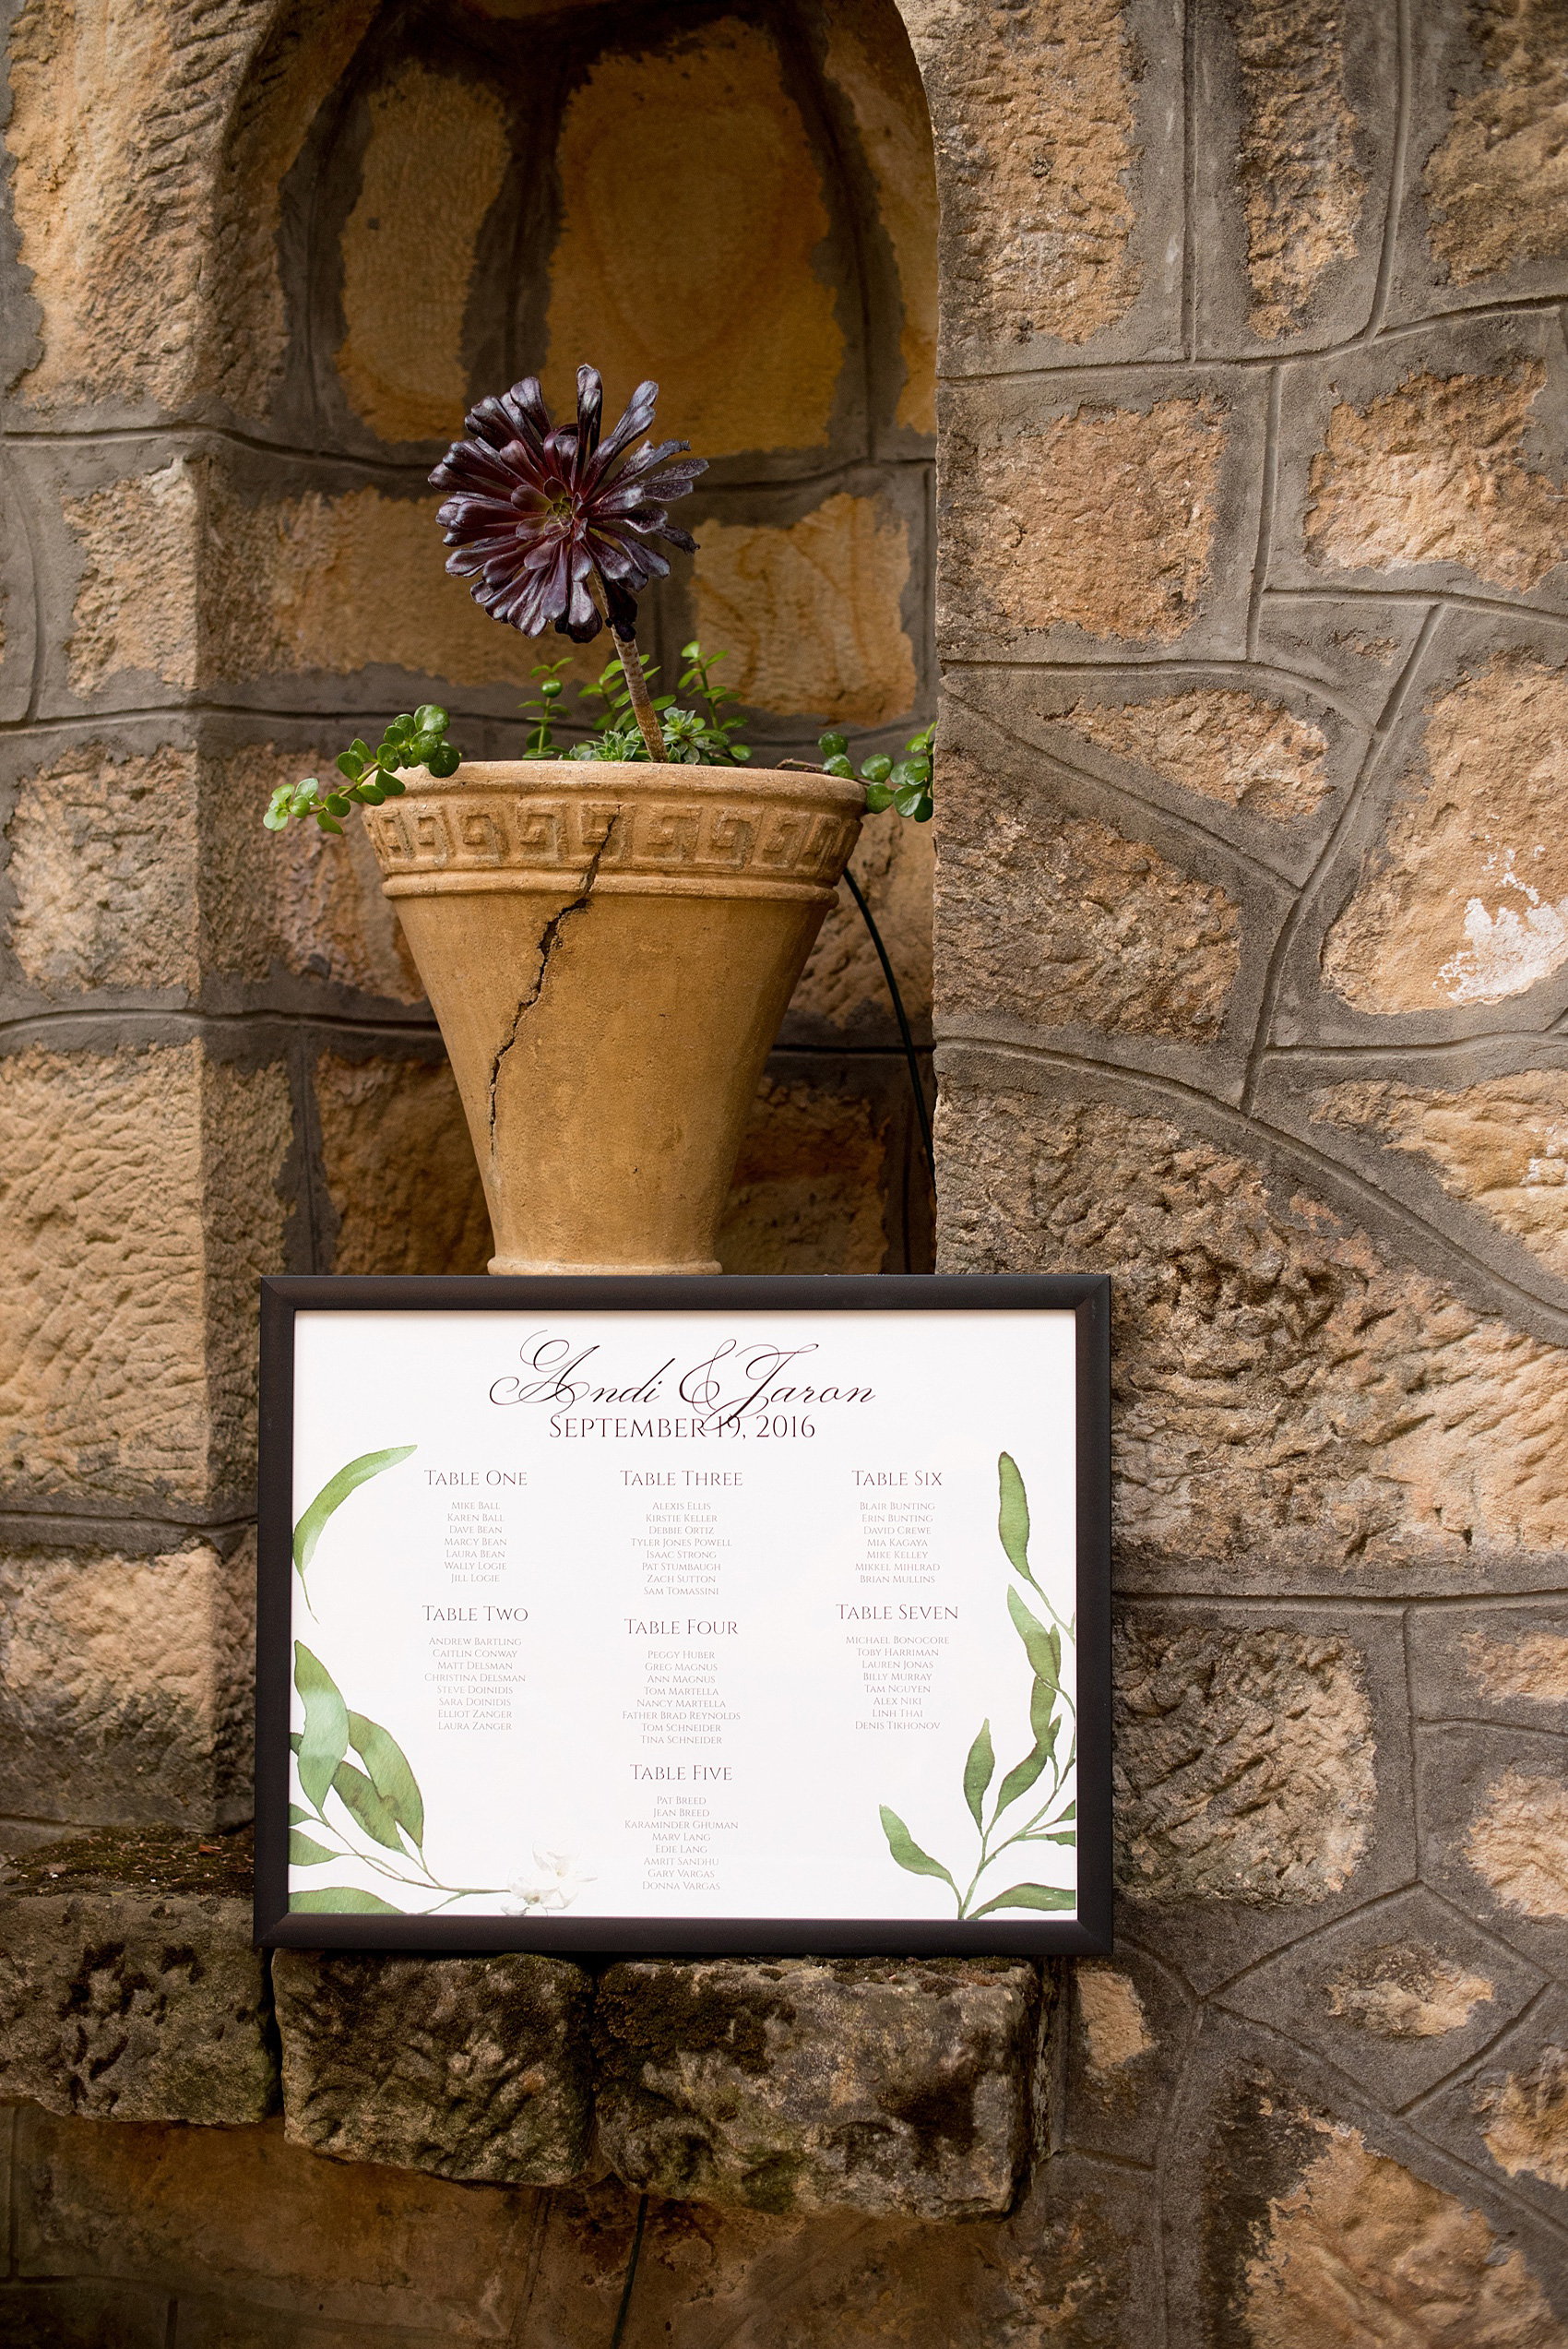 Mikkel Paige Photography photo of the framed table sign at a Testarossa Winery wedding in Los Gatos, California.